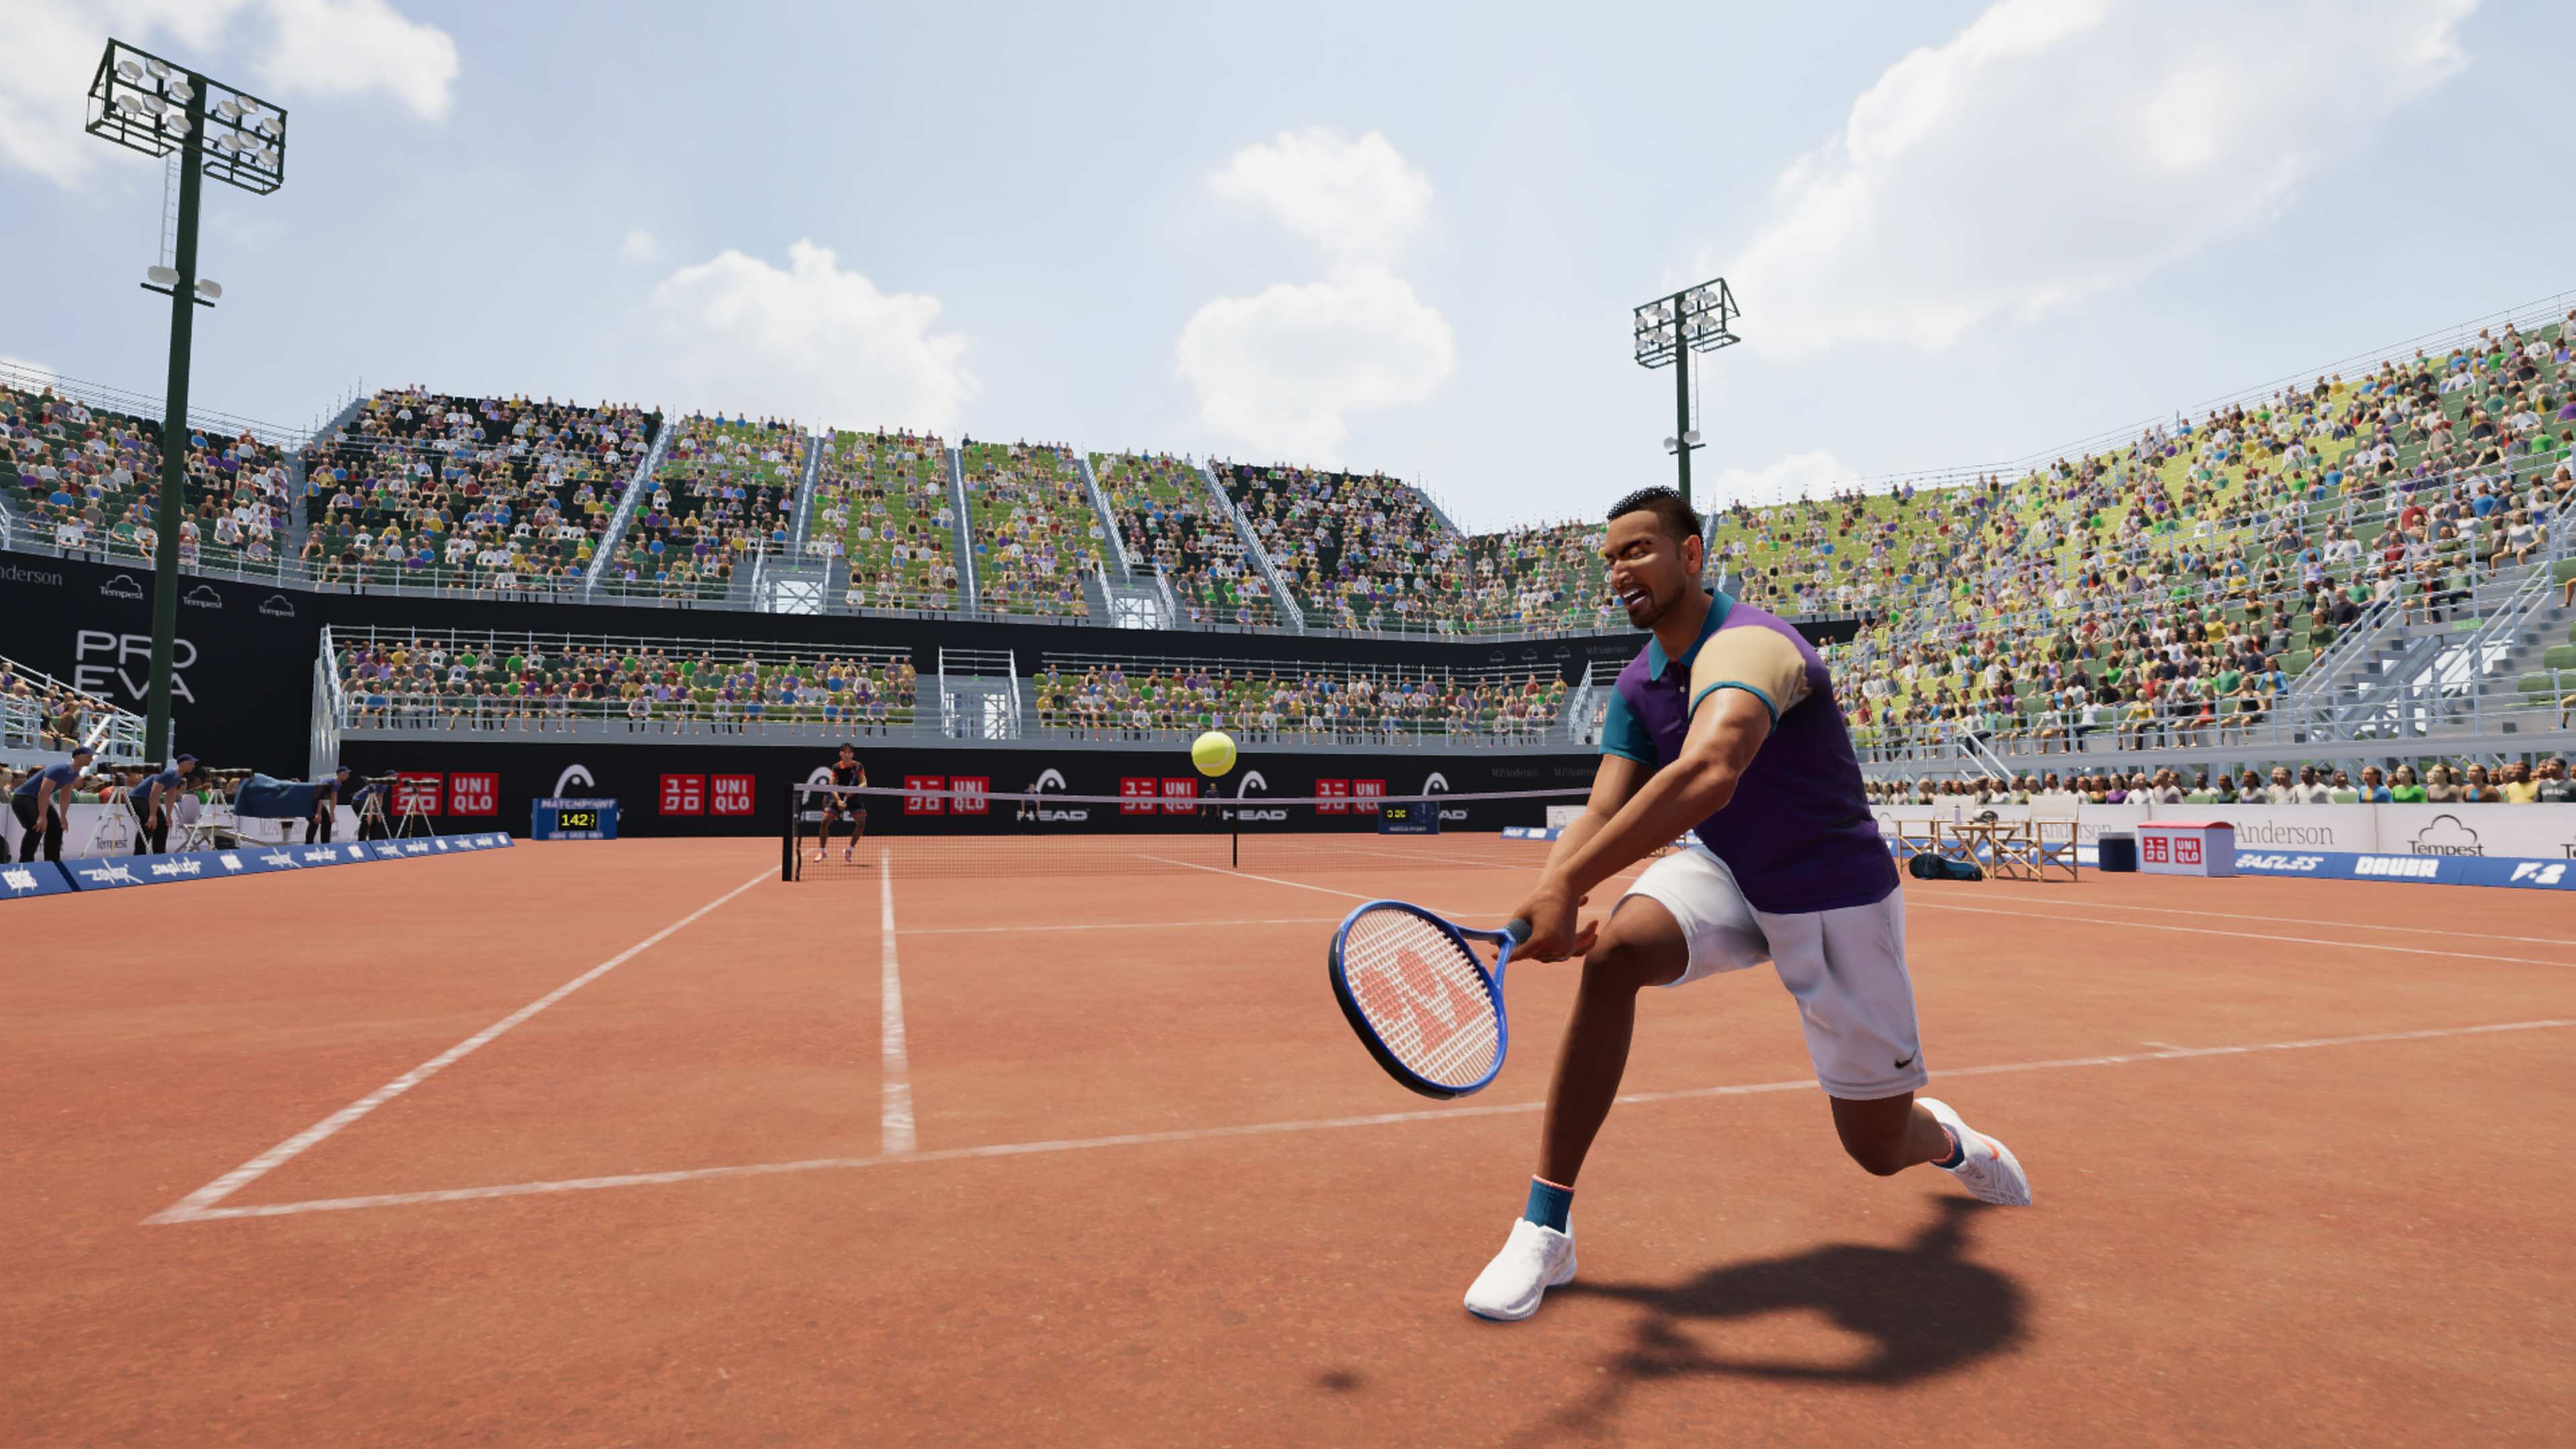 Matchpoint Tennis Championships PS4